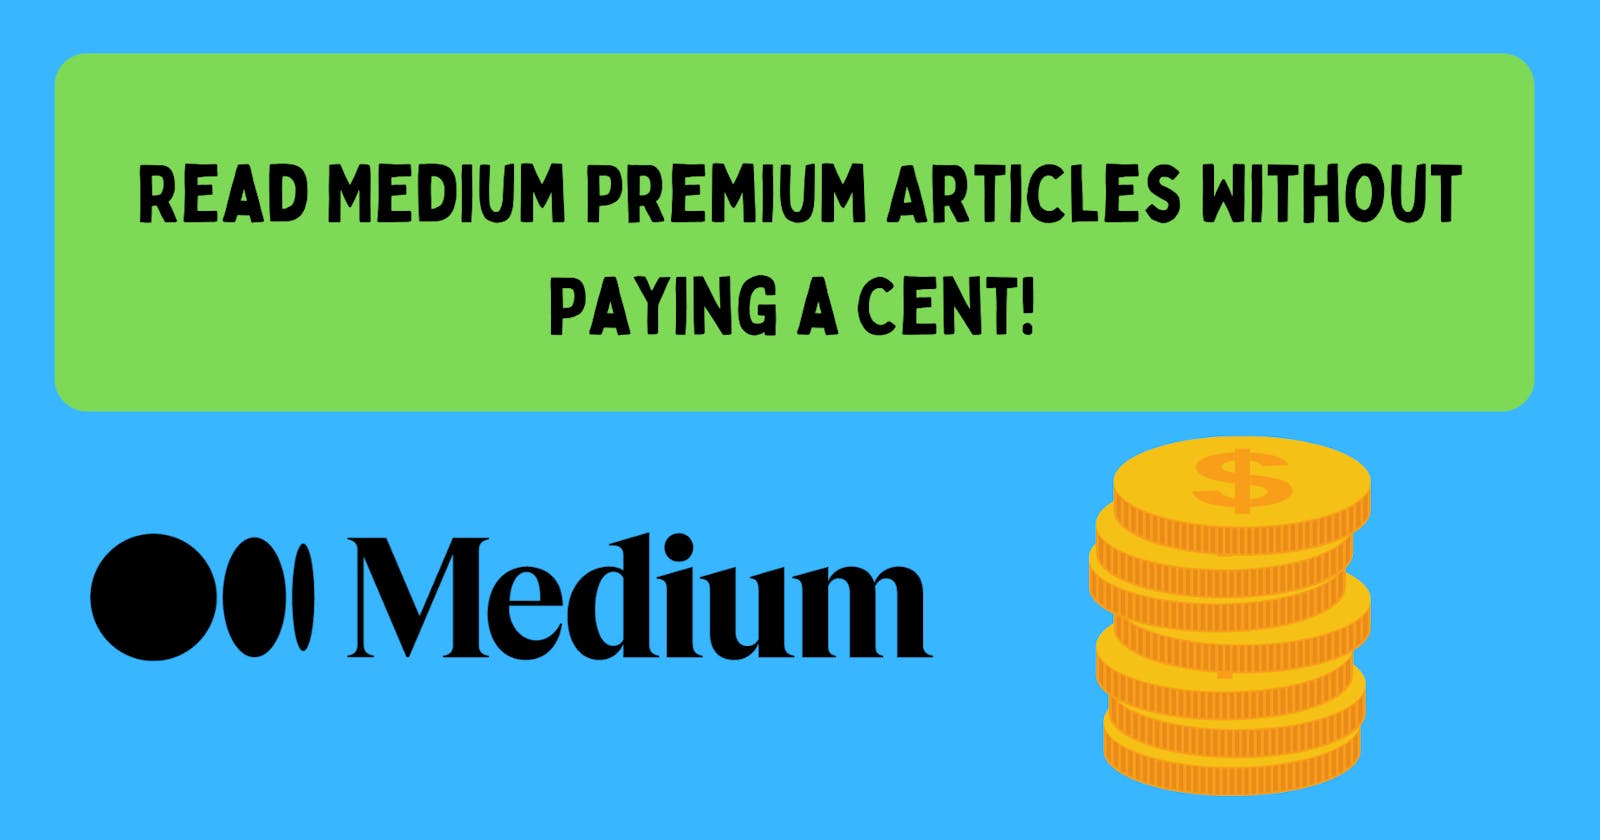 Read Medium Premium Articles Without Paying a Cent!